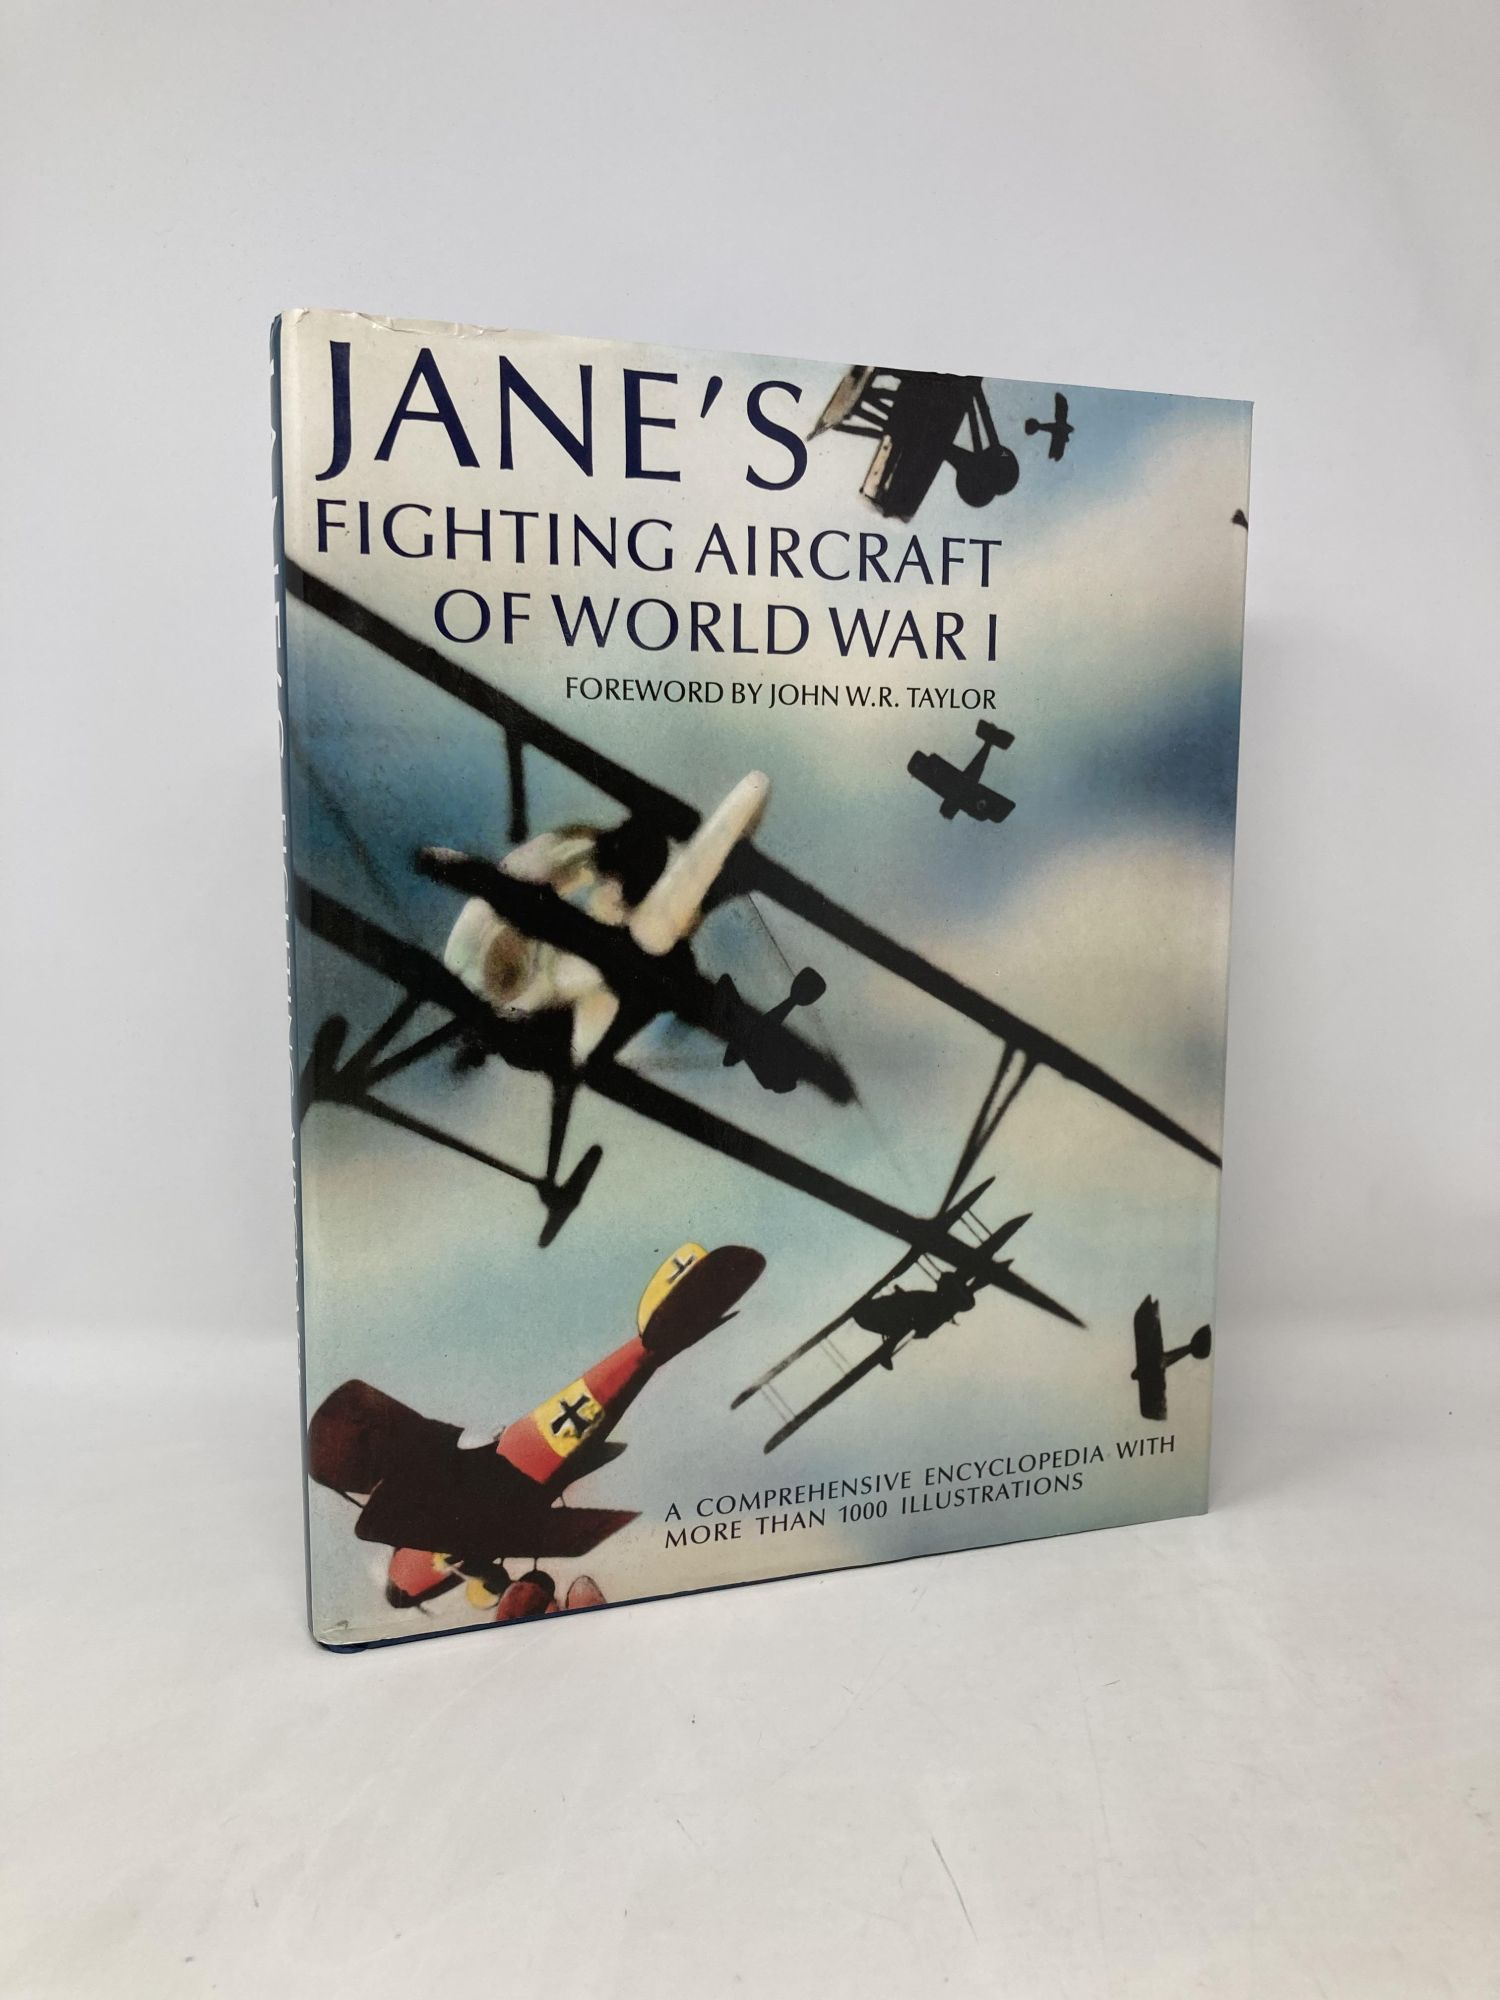 Jane's Fighting Aircraft of World War I: A Comprehensive Encyclopedia with More than 1000 Illustrations - Whittaker, W. E. De. B.